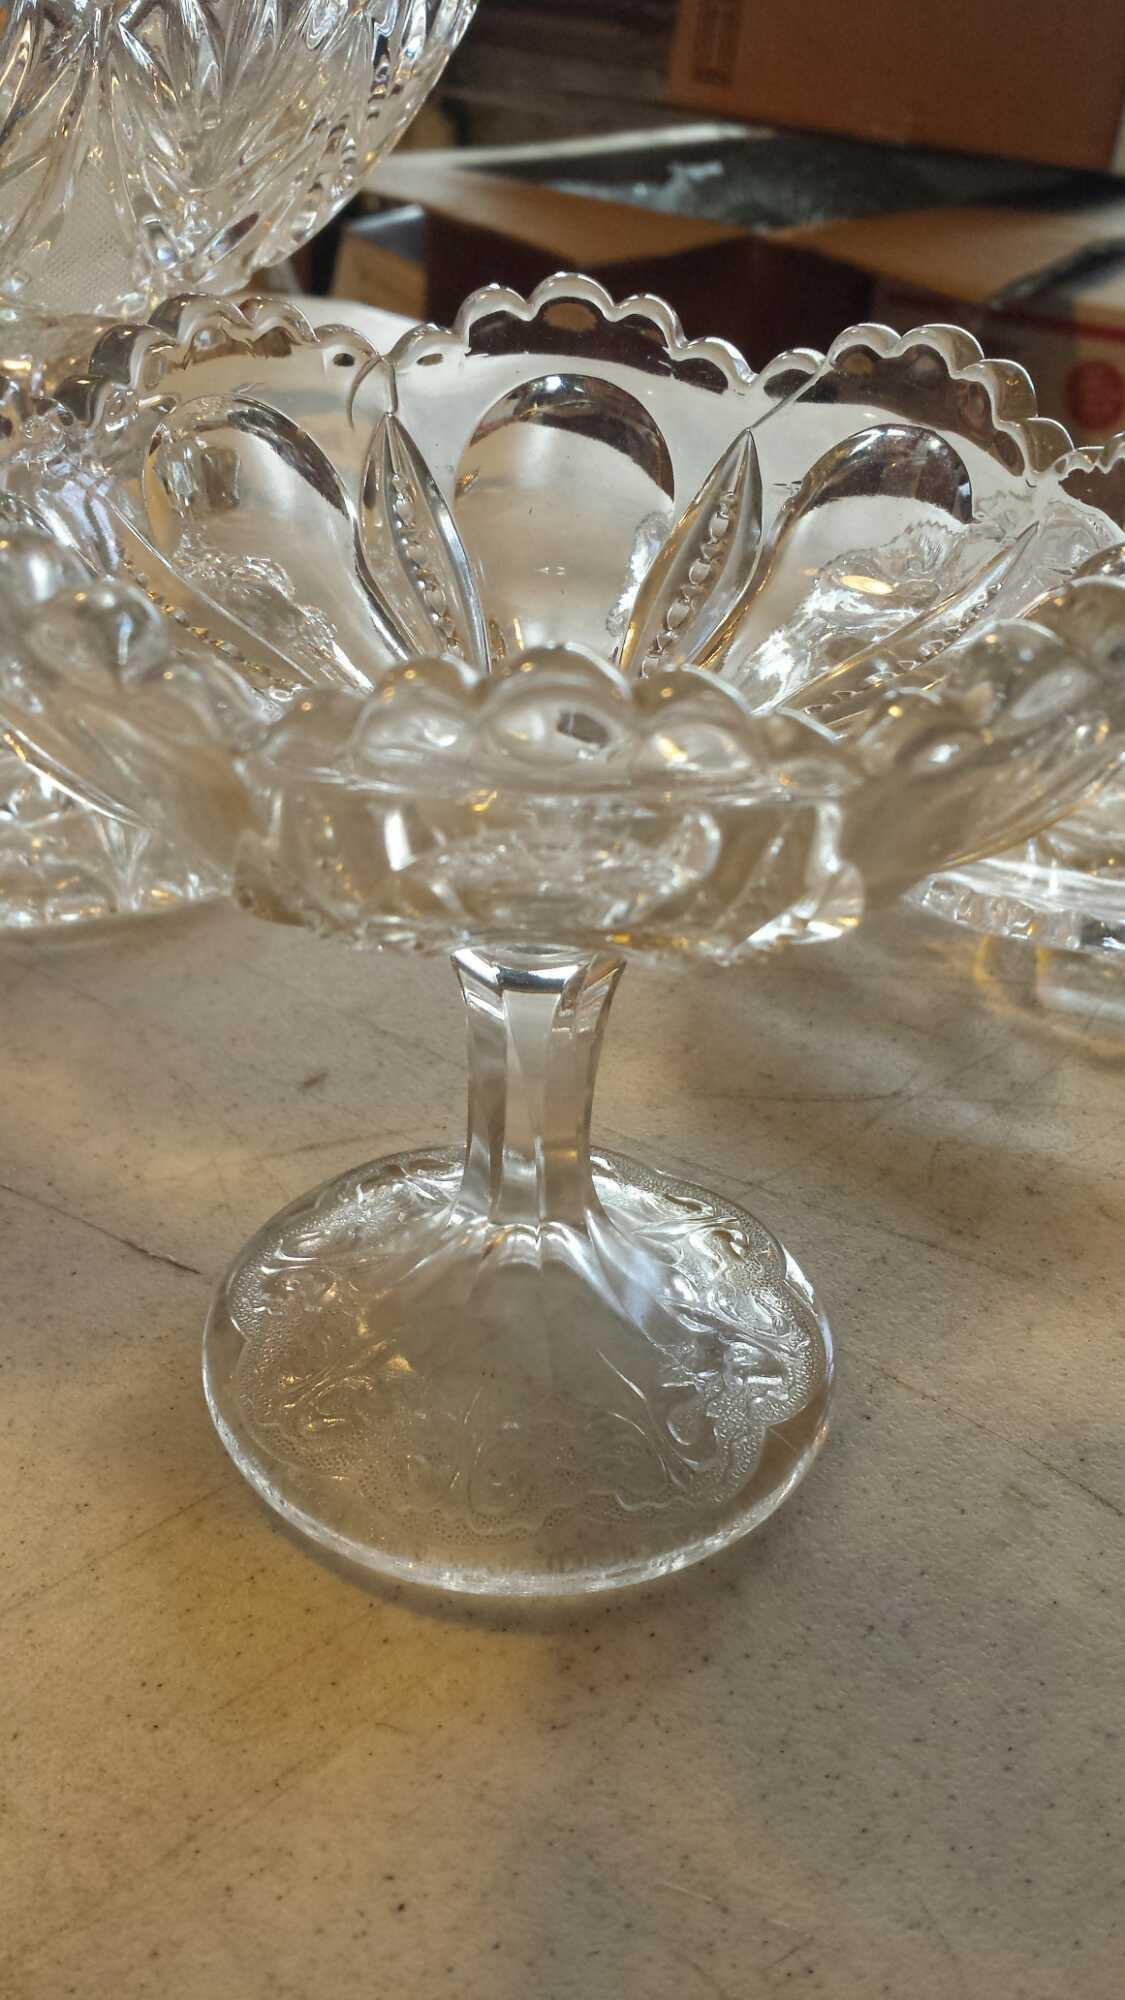 4 Exciting Glass Pieces. (2) compotes (1) small dish (1) serving tray with handles